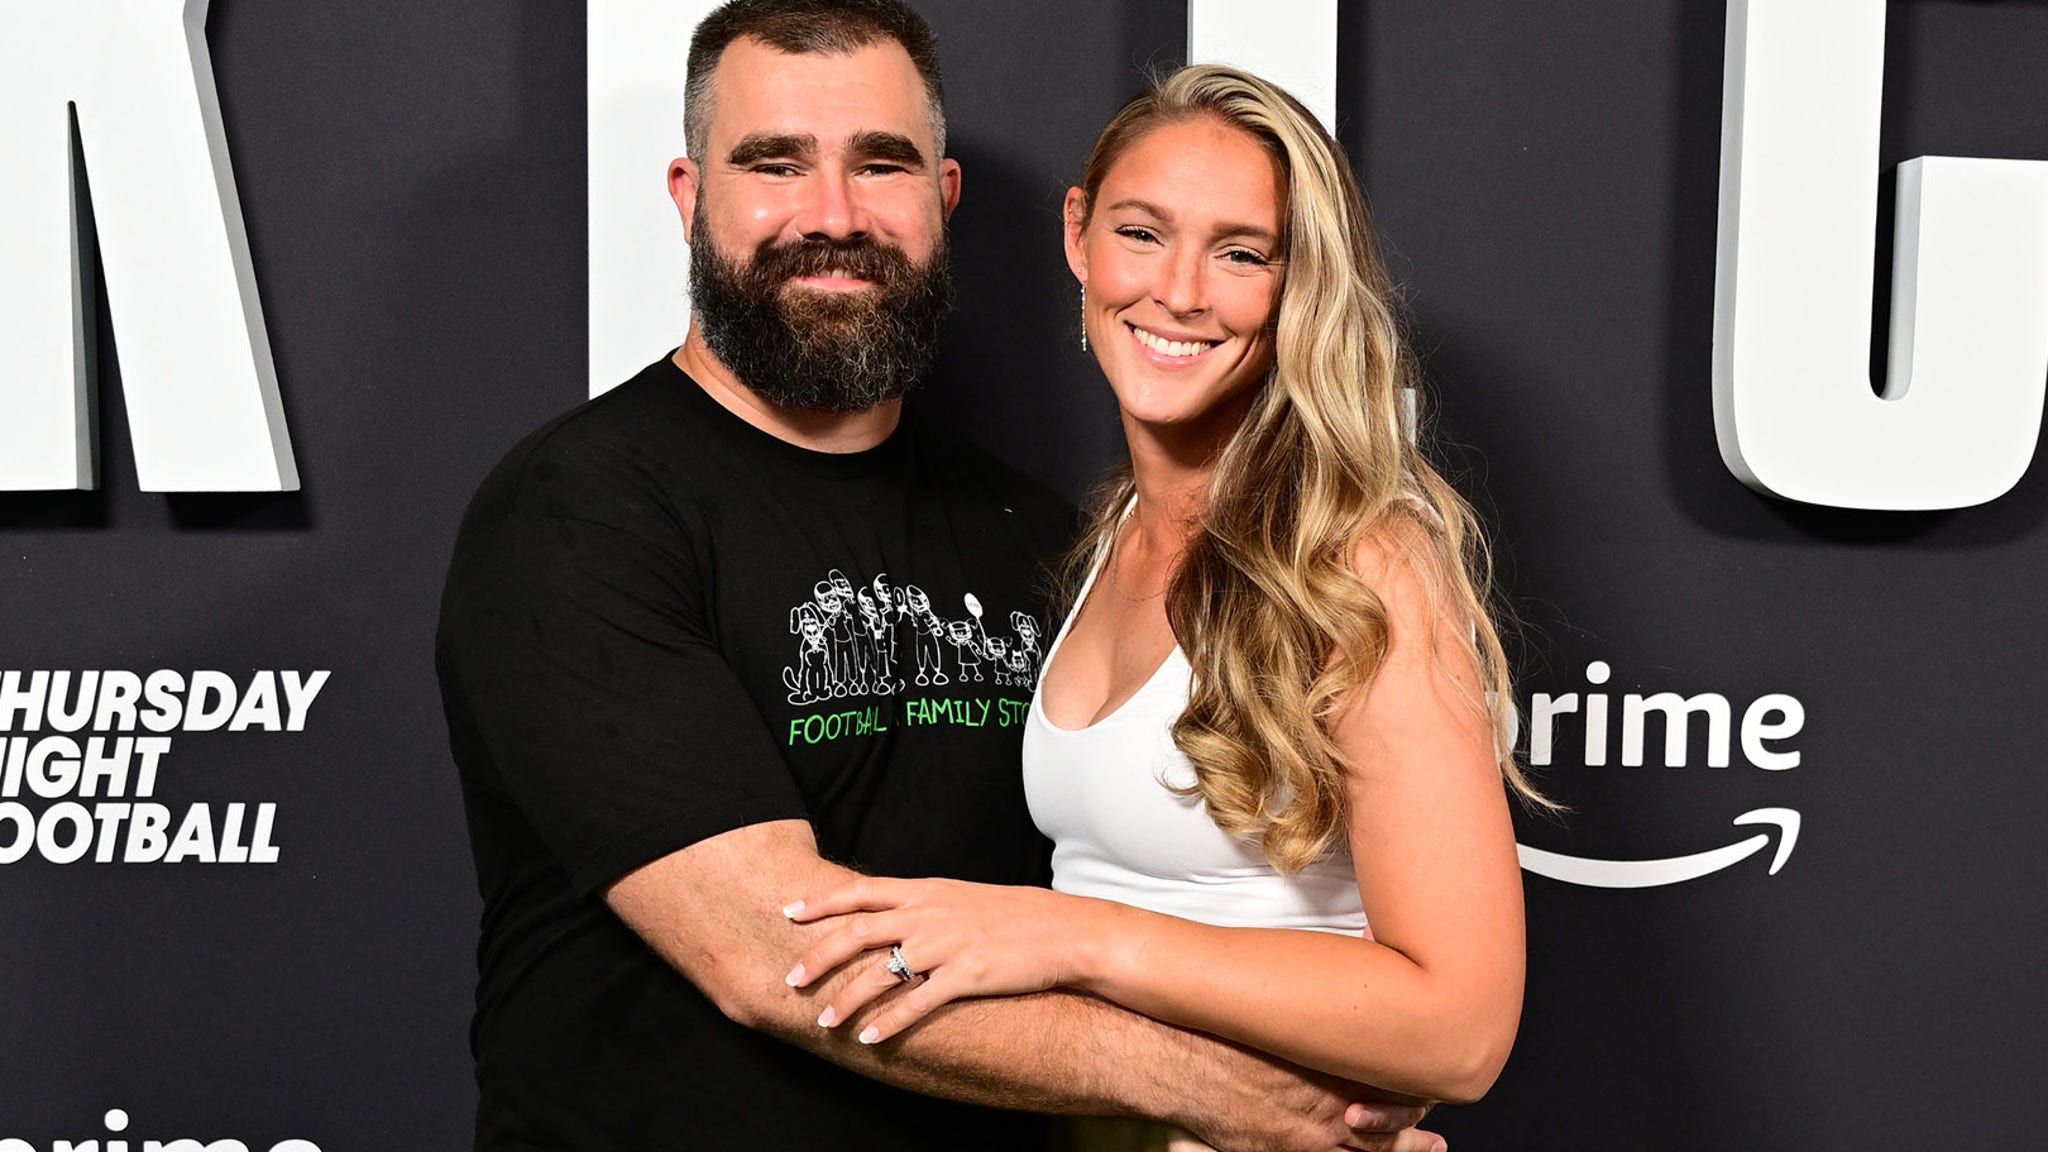 Jason Kelce Wears Tinder Shirt on Valentine's Day Date with Wife Kylie